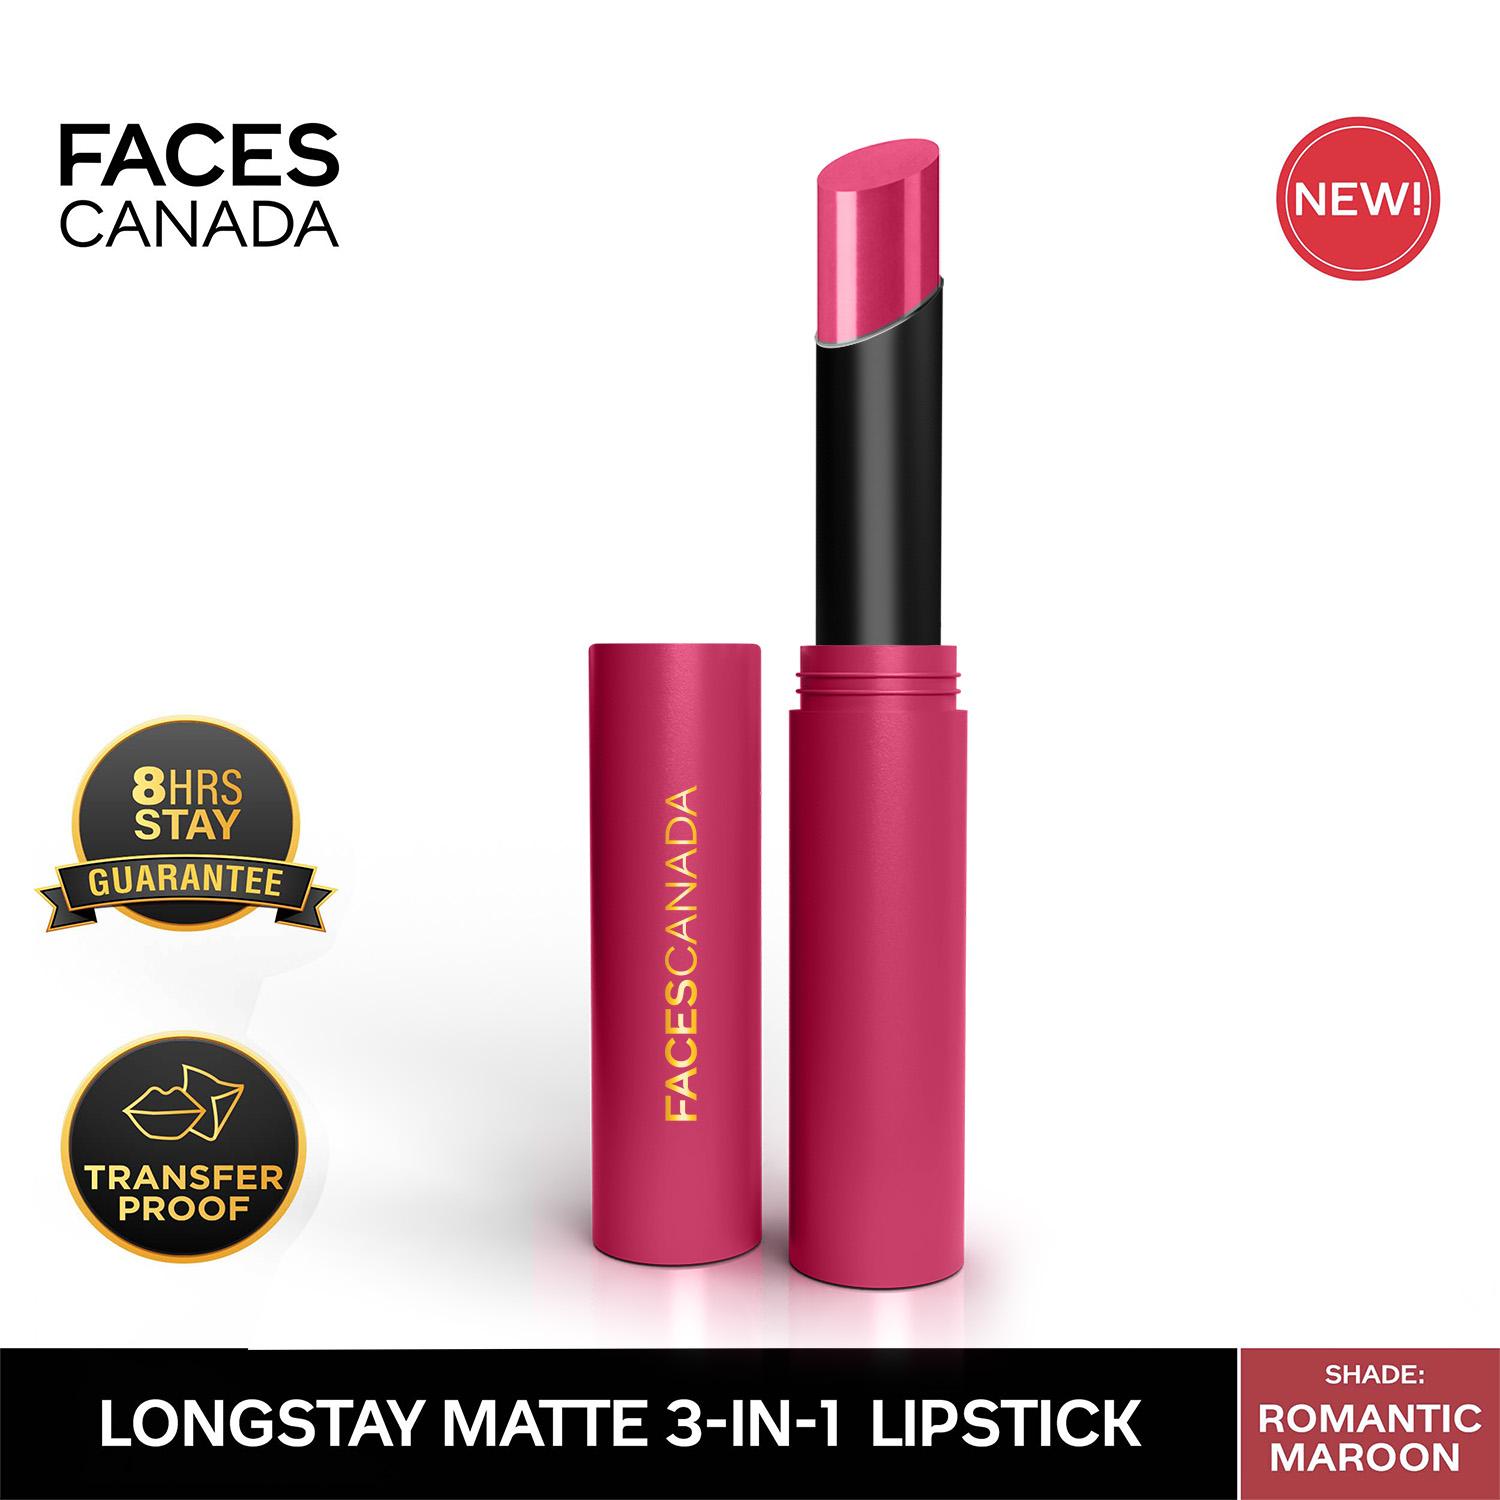 Faces Canada | Faces Canada Long Stay 3-in-1 Matte Lipstick - Romantic Maroon 01, 8HR Stay, Primer-Infused (2 g)